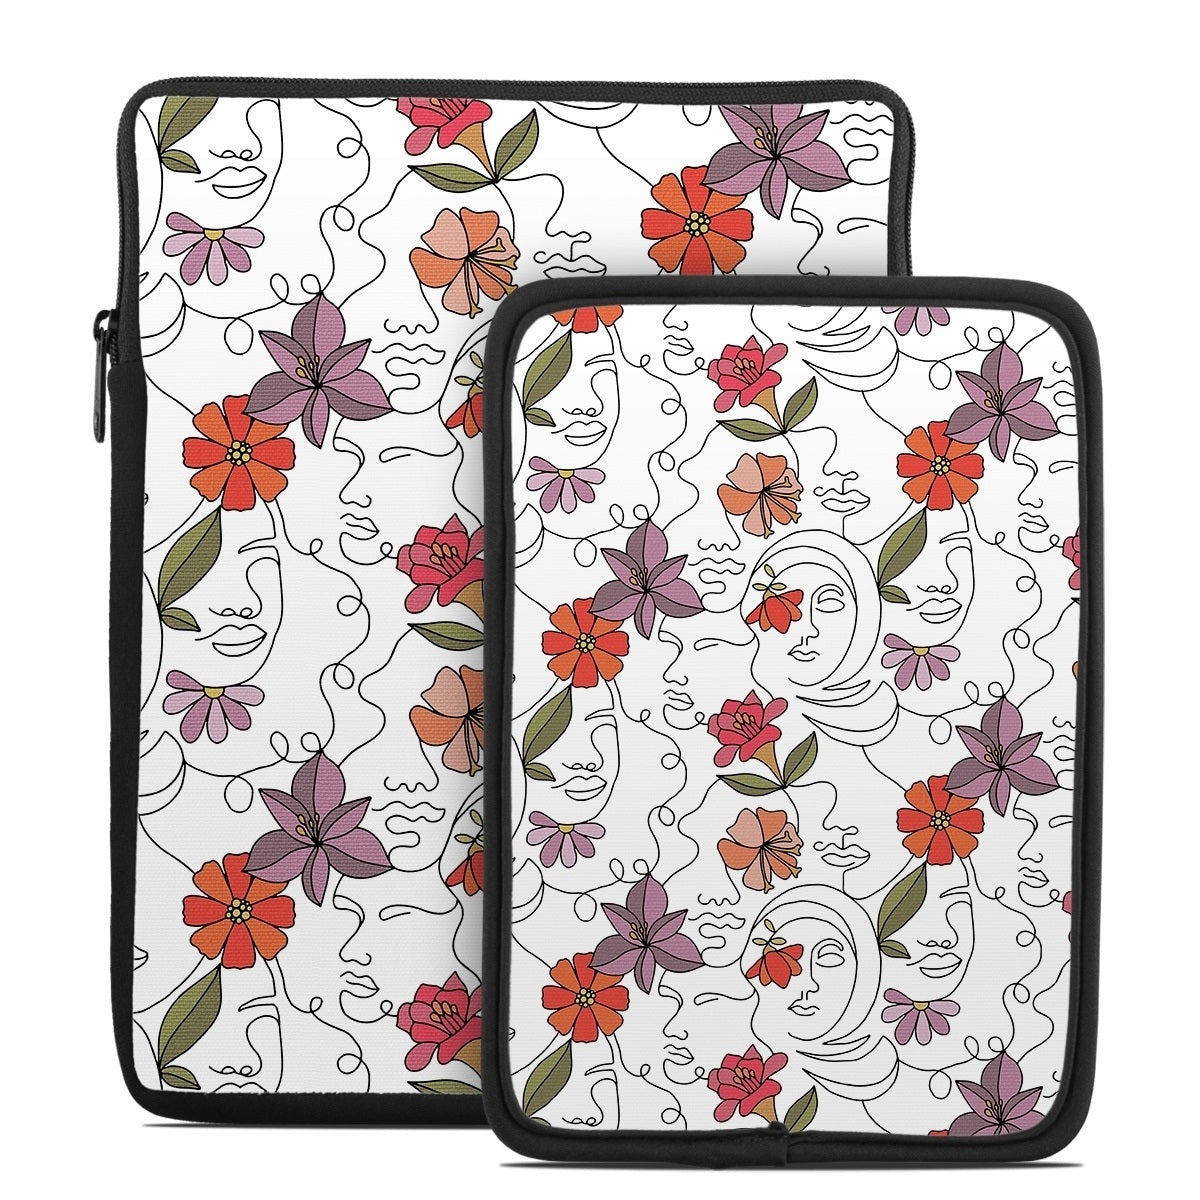 Growing Together - Tablet Sleeve